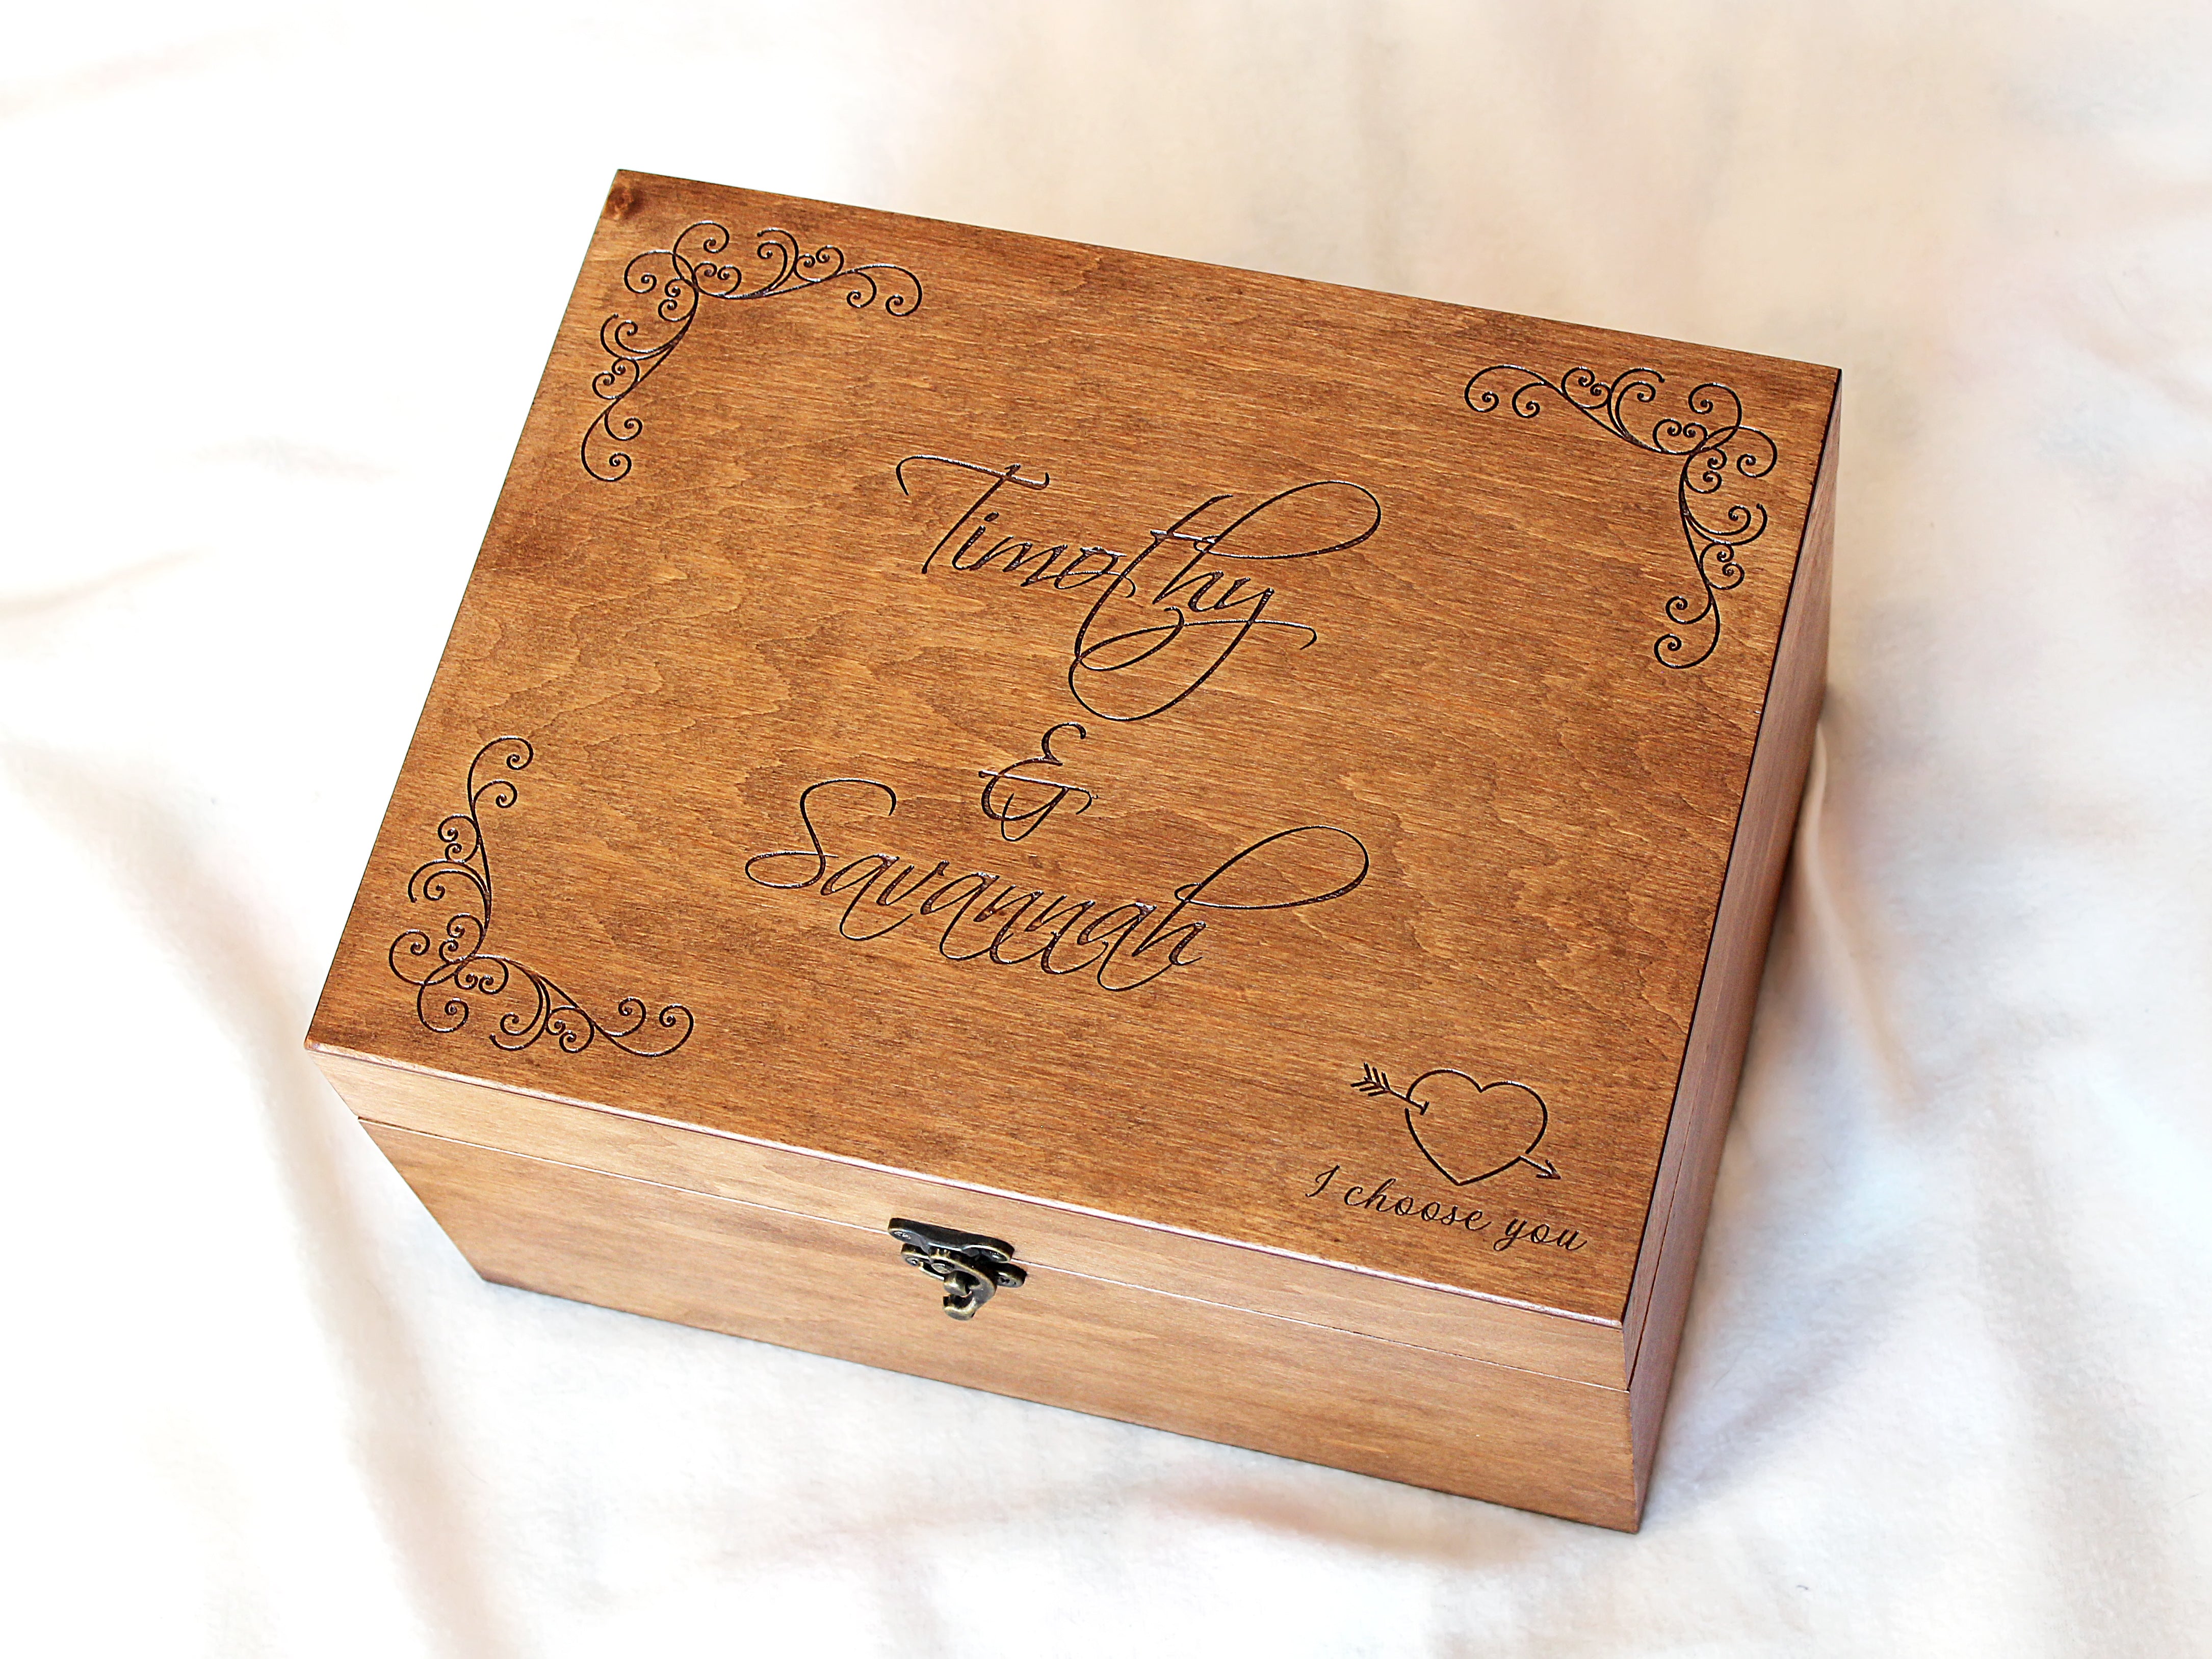 Tie Storage Box - Personalized Groom Gifts from The Bride, Premium Quality Custom Wedding Gift, Solid Wood Box with Lid, 8 Ties Organizer